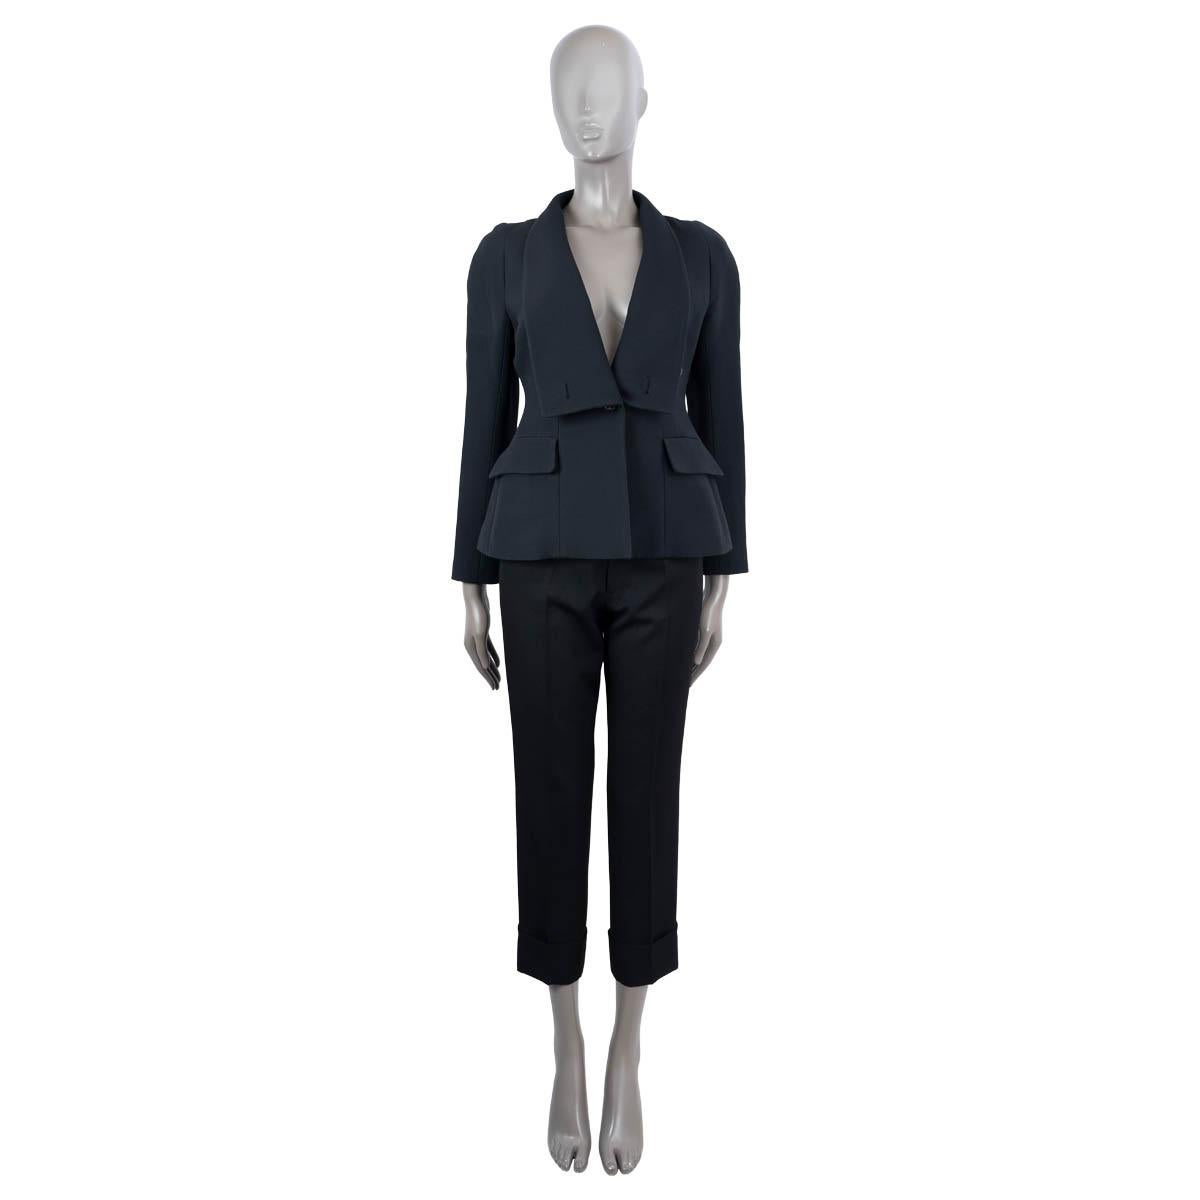 100% authentic Christian Dior tuxedo jacket in midnight blue wool (77%) and silk (23%). Features a wide shawl collar adn two flap pockets. Closes with a button on the front. Lined in silk (100%). Has been worn and is in excellent condition.

2018